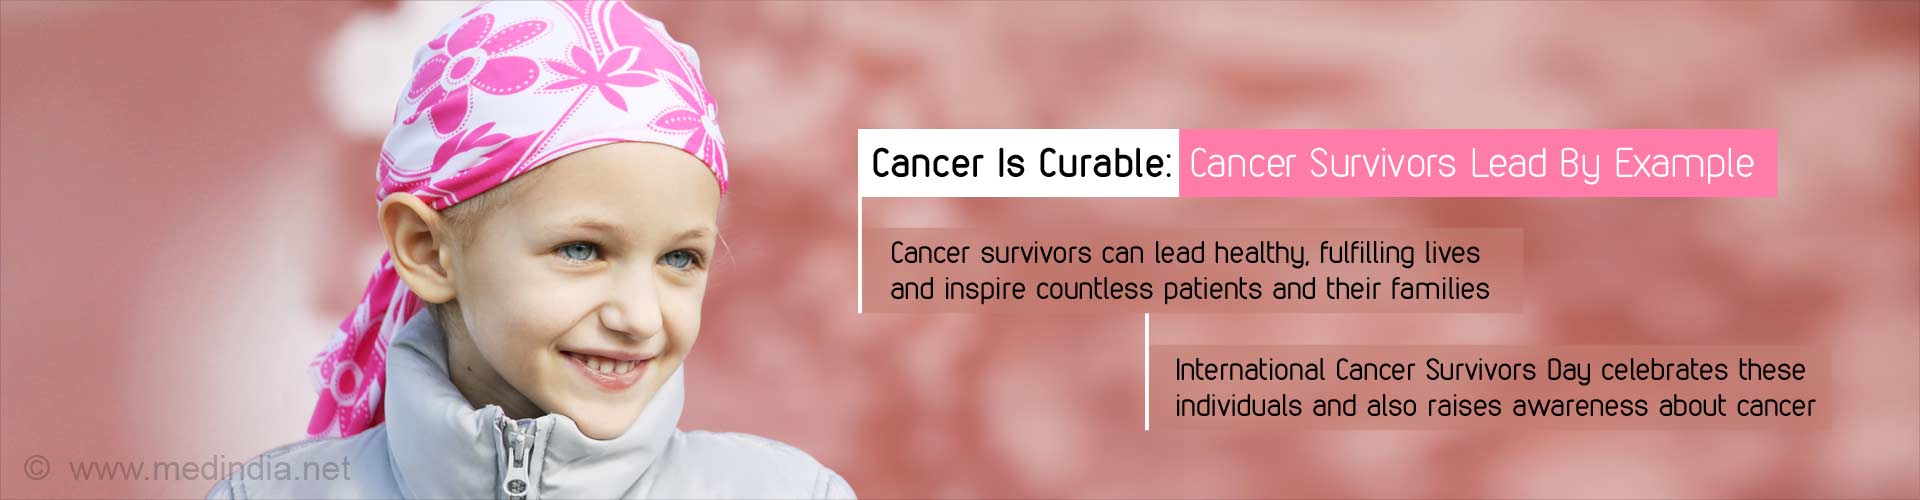 Cancer is Curable: Cancer survivors lead by example 
- Cancer survivors can lead healthy, fulfilling lives and inspire countless patients and their families
- International Cancer Survivors Day celebrates these individuals and also raises awareness about cancer